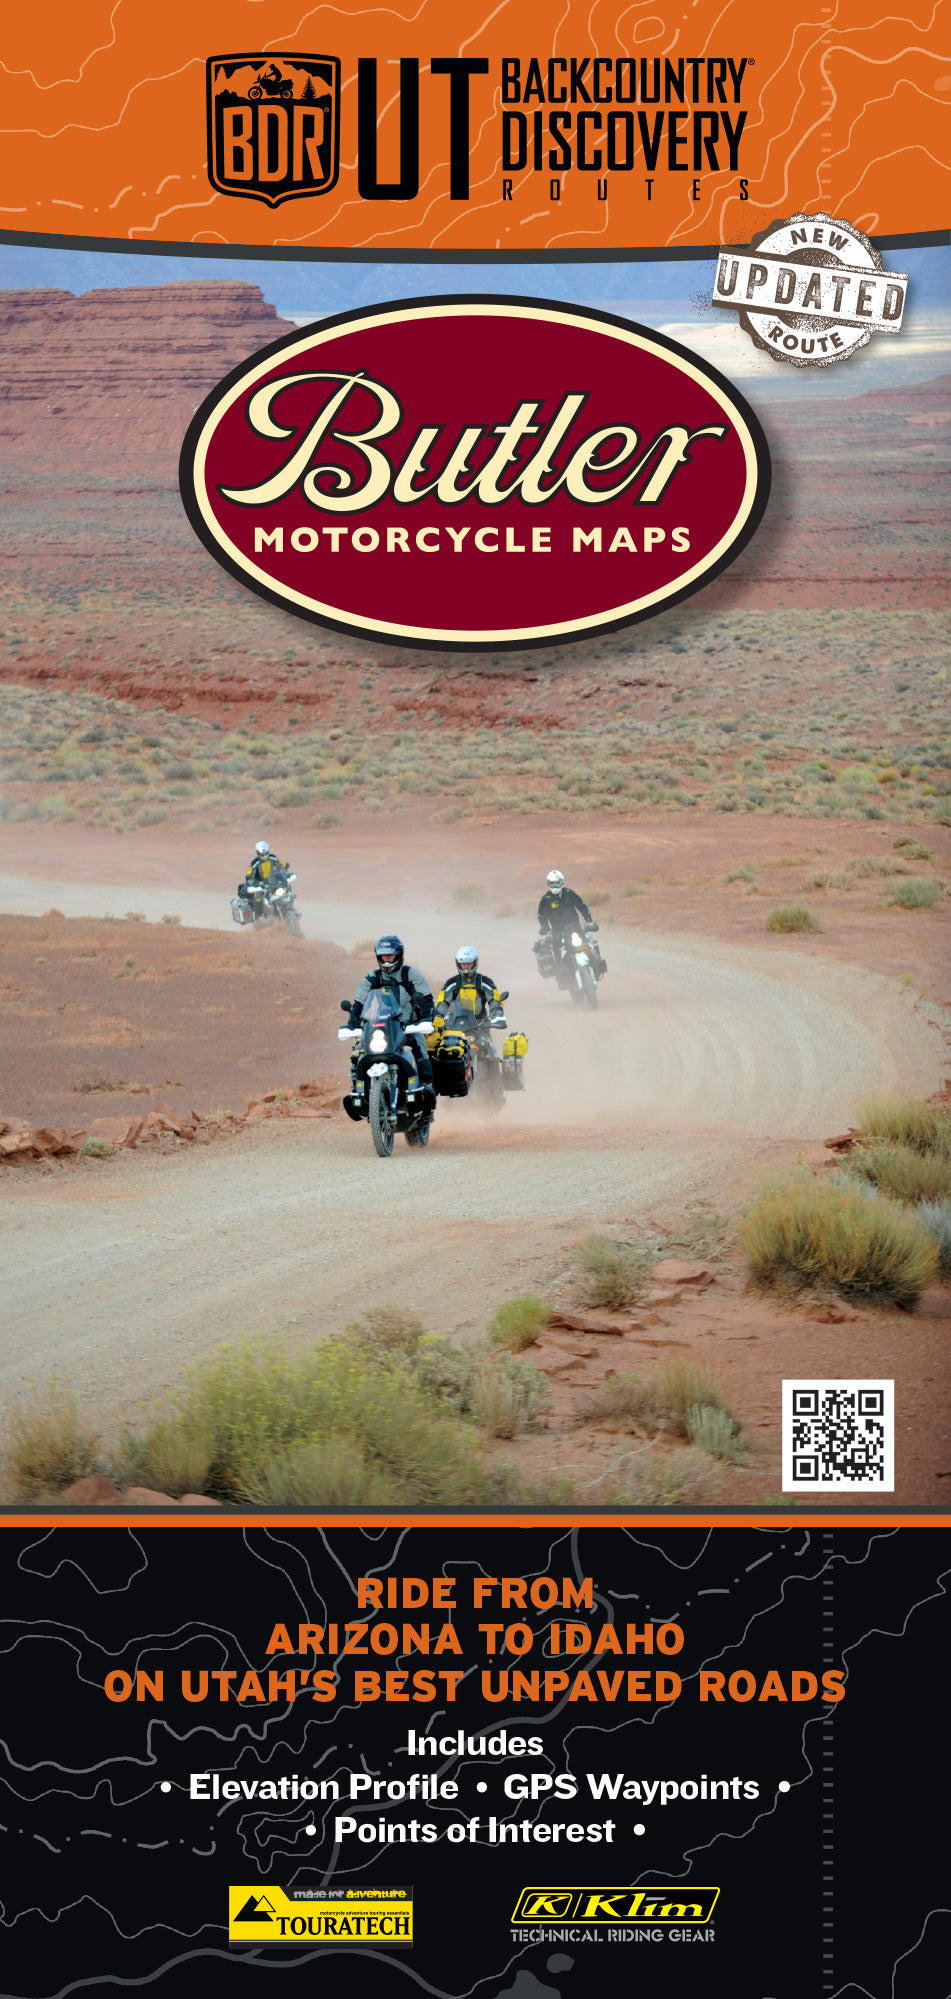 Utah Backcountry Discovery Route (UTBDR) Map 2nd Edition